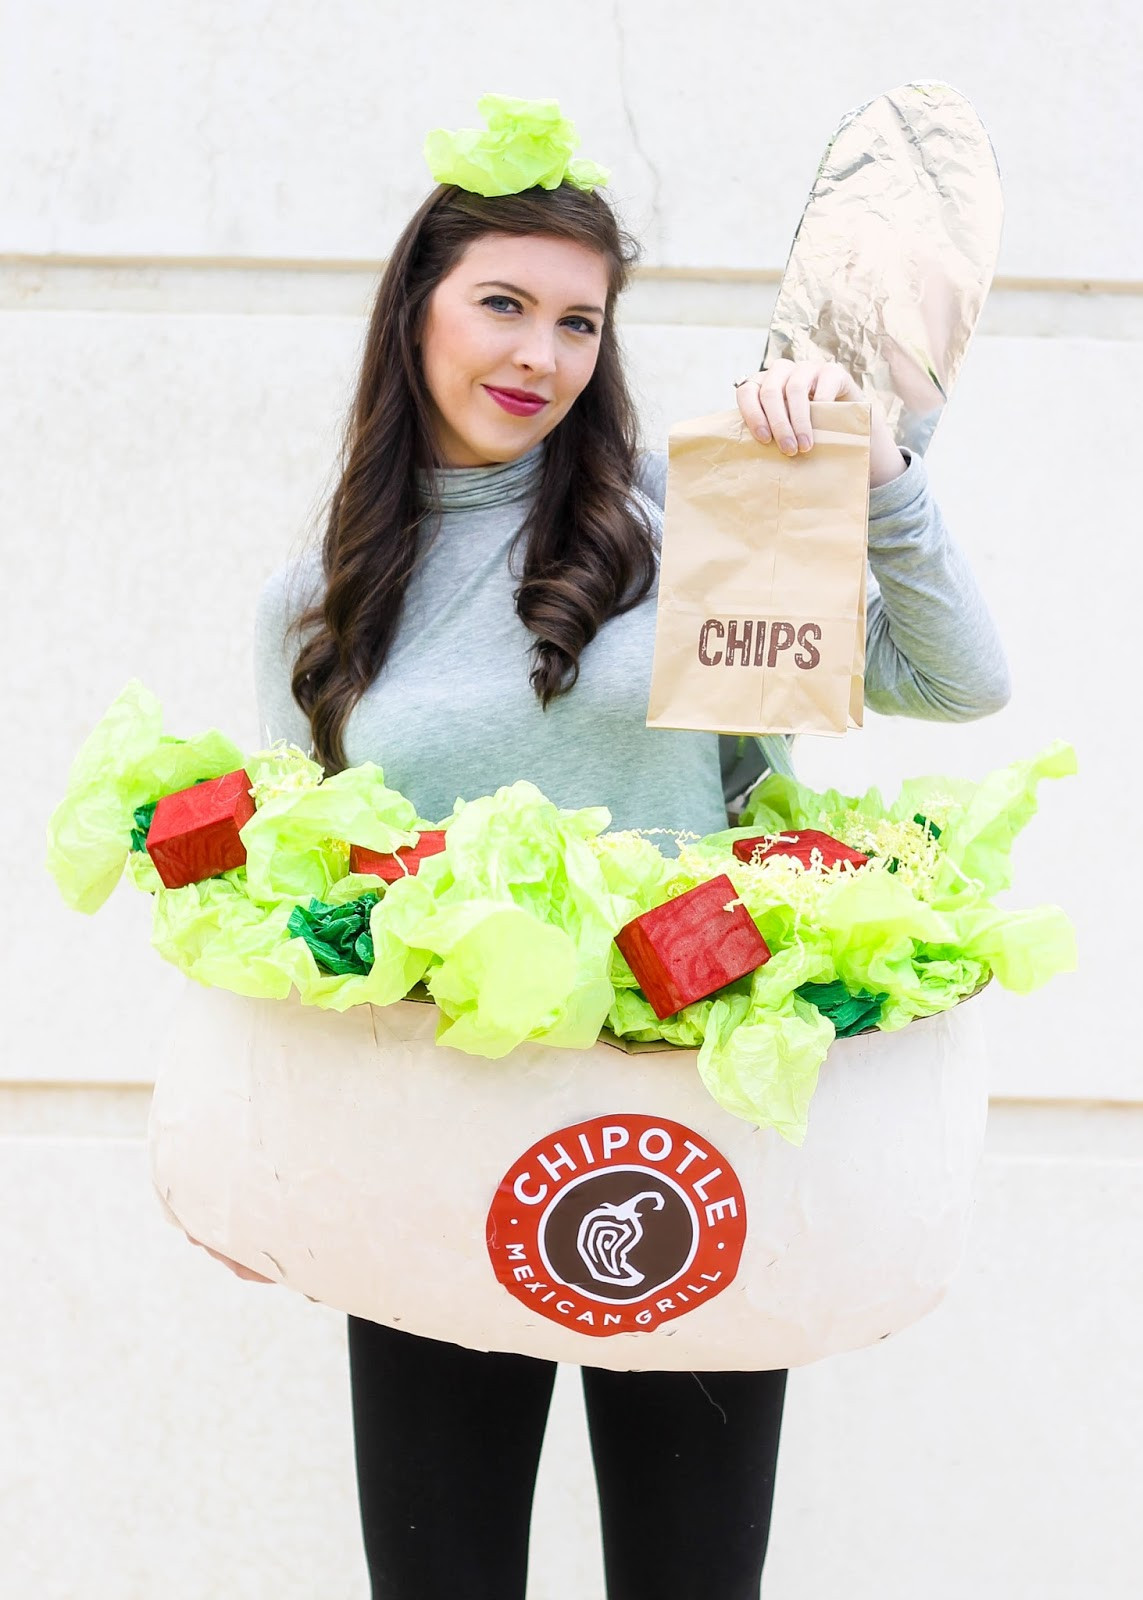 Toddler Costumes DIY
 Halloween Chipotle Costume DIY Pretty in the Pines